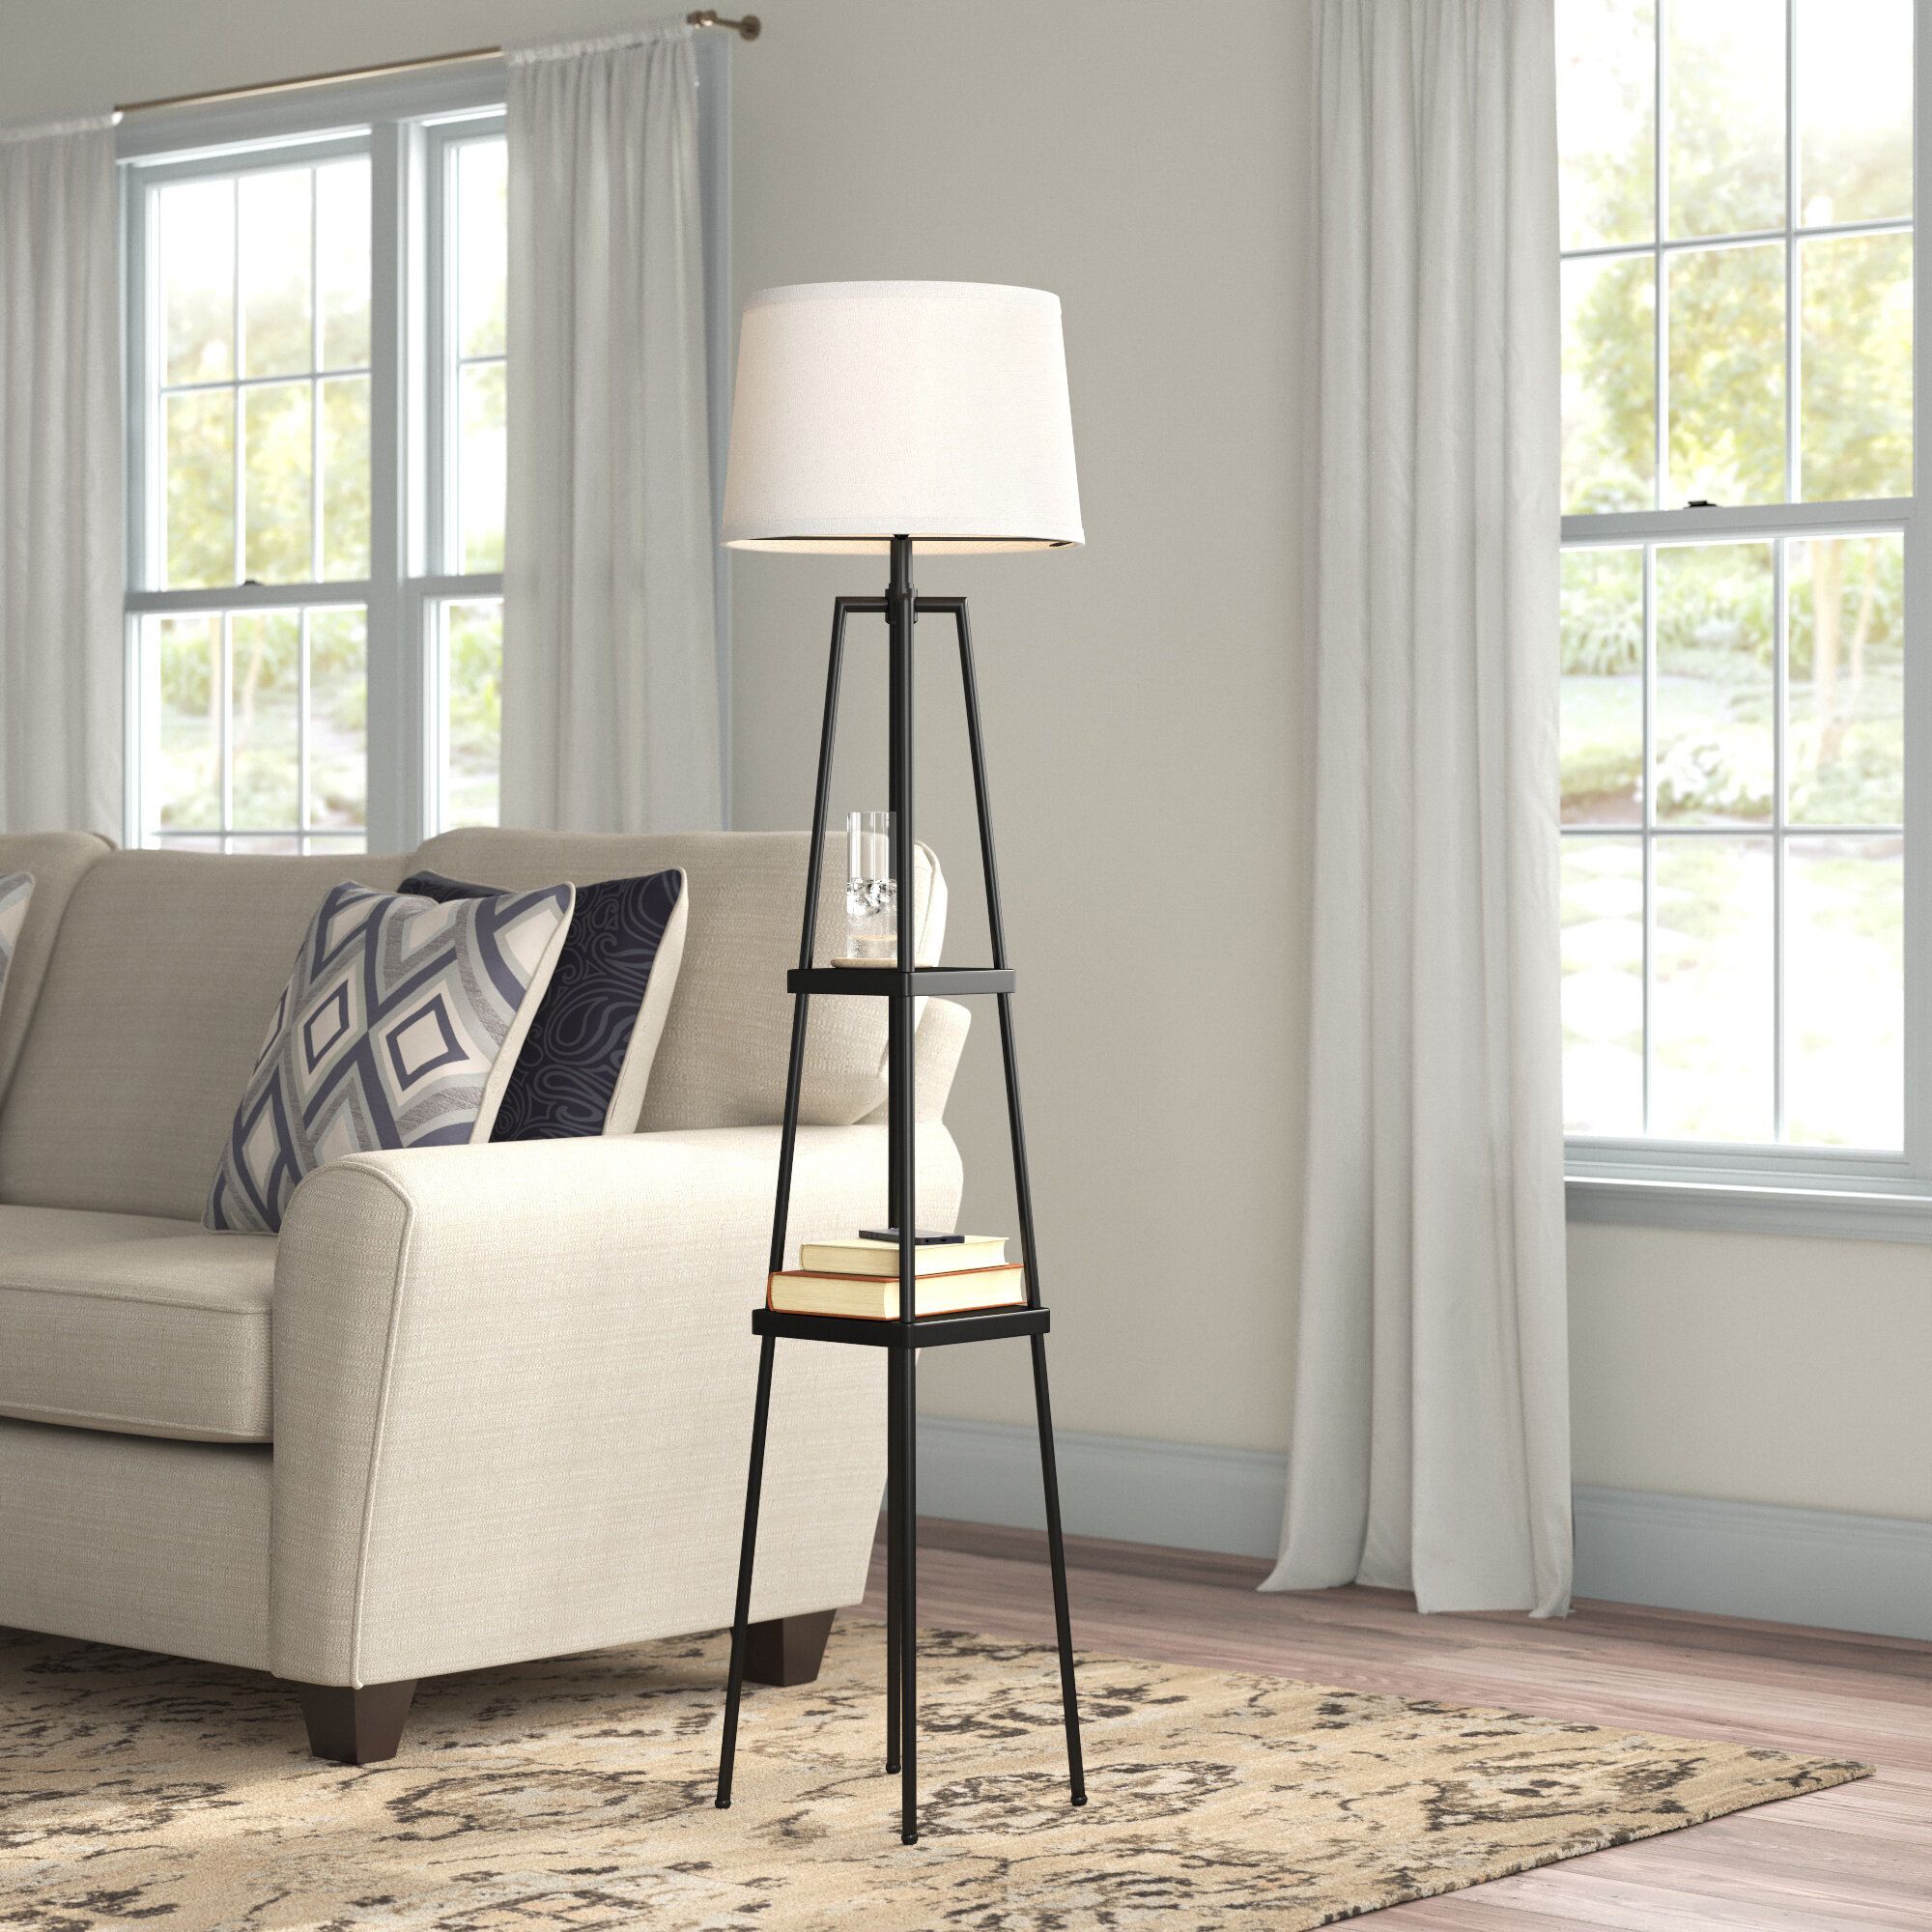 Latitude Run® 58" Modern Metal Etagere Floor Lamp With Shelves And Linen  Shade & Reviews | Wayfair With Regard To 58 Inch Floor Lamps (Photo 1 of 15)